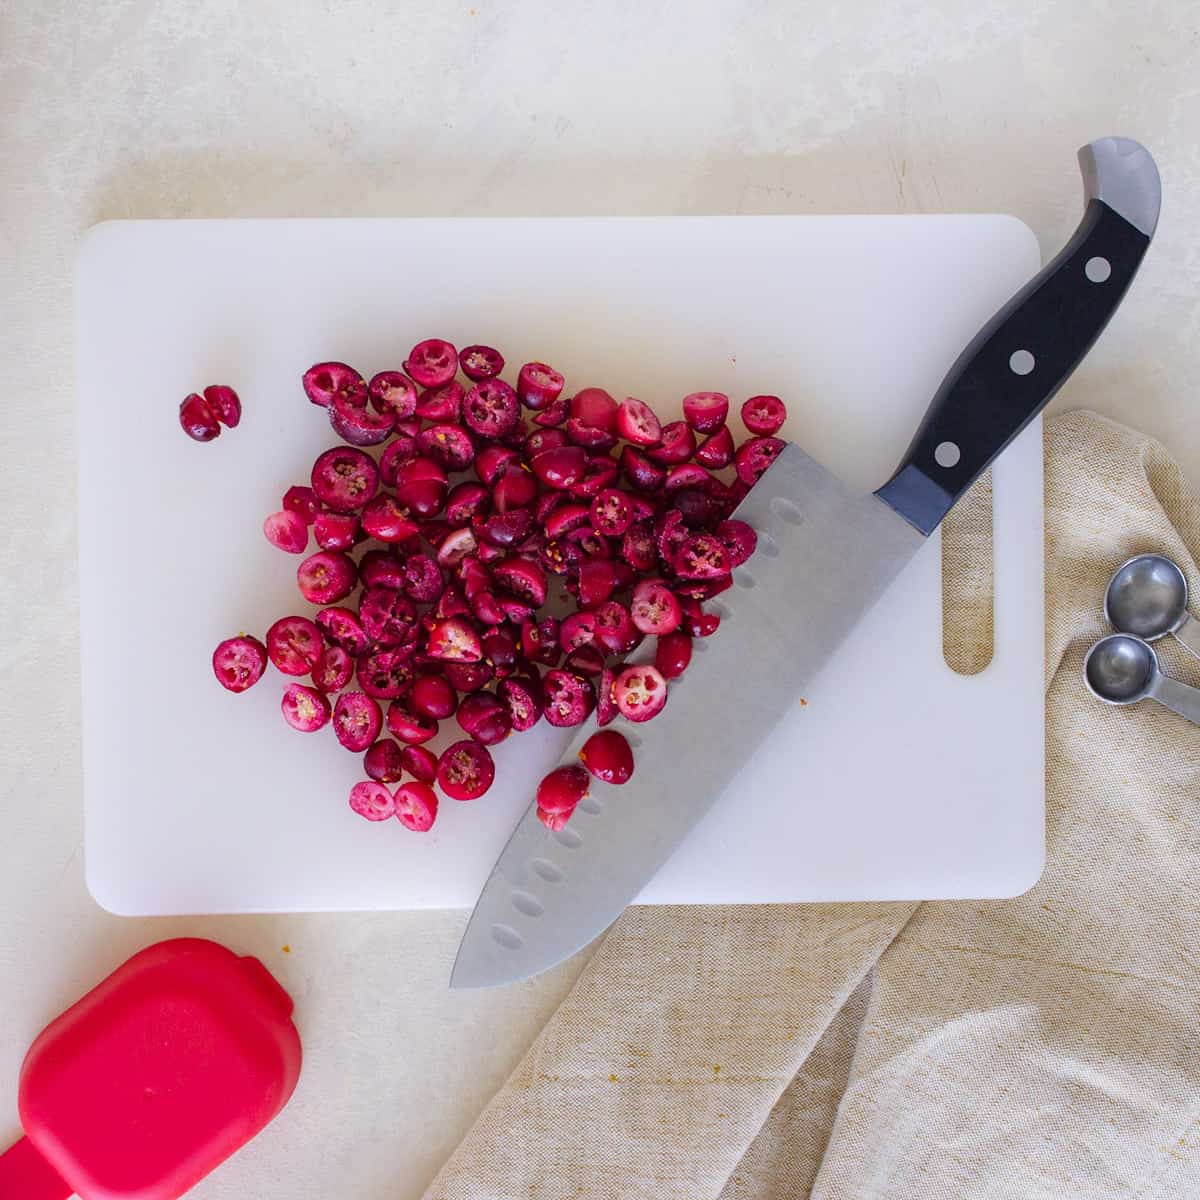 Chopped cranberries and a chef's knife on a white cutting board.